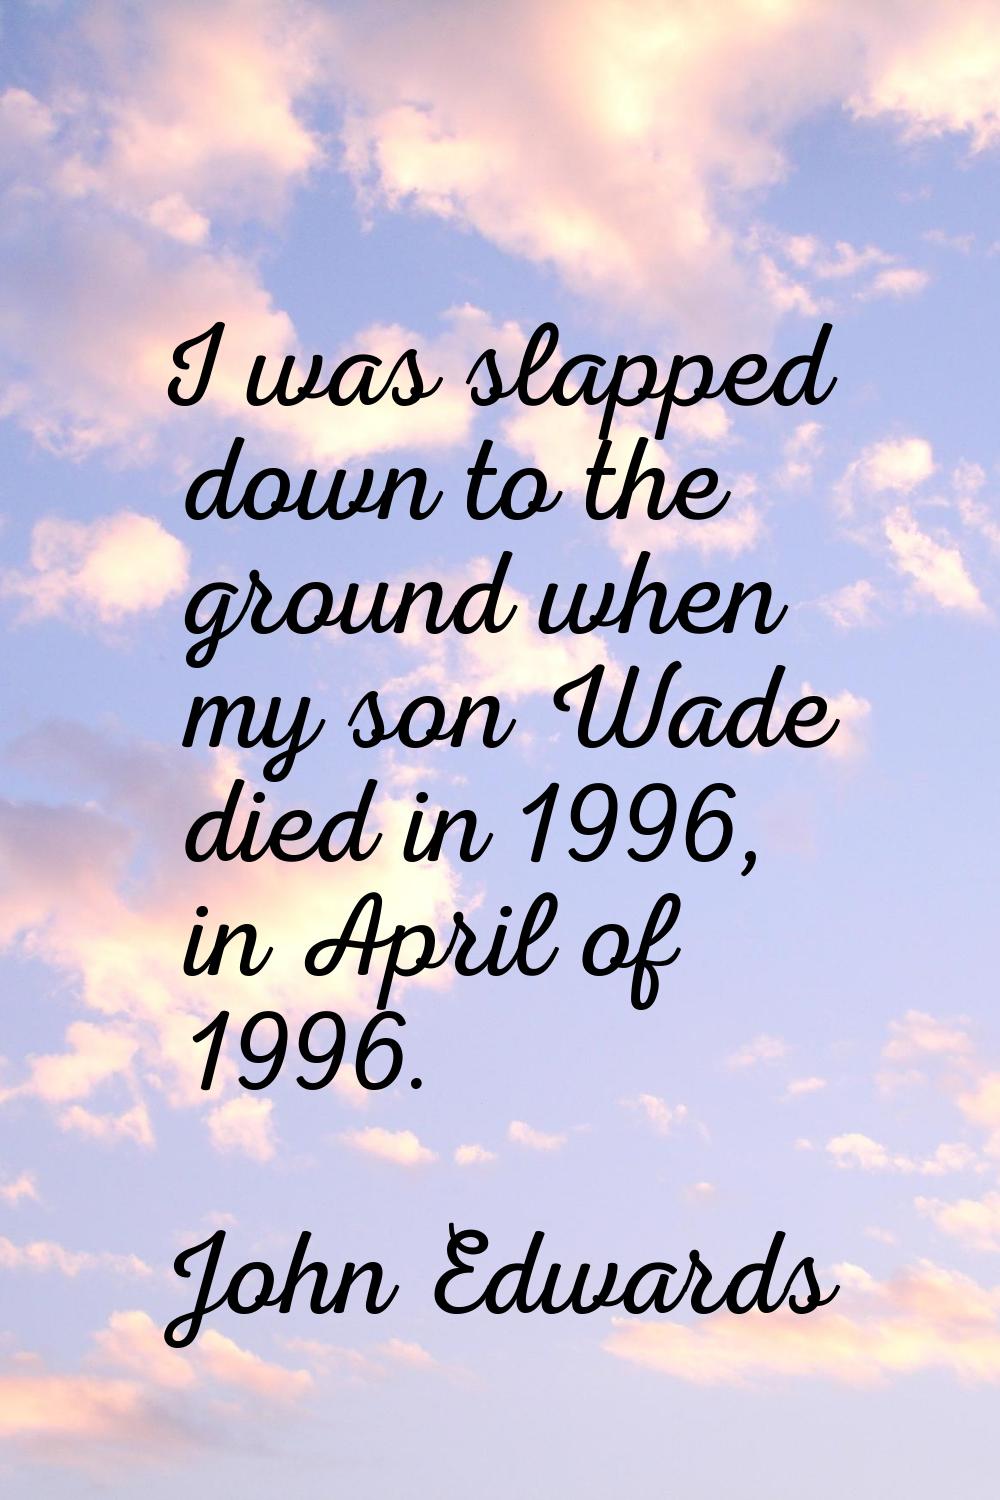 I was slapped down to the ground when my son Wade died in 1996, in April of 1996.